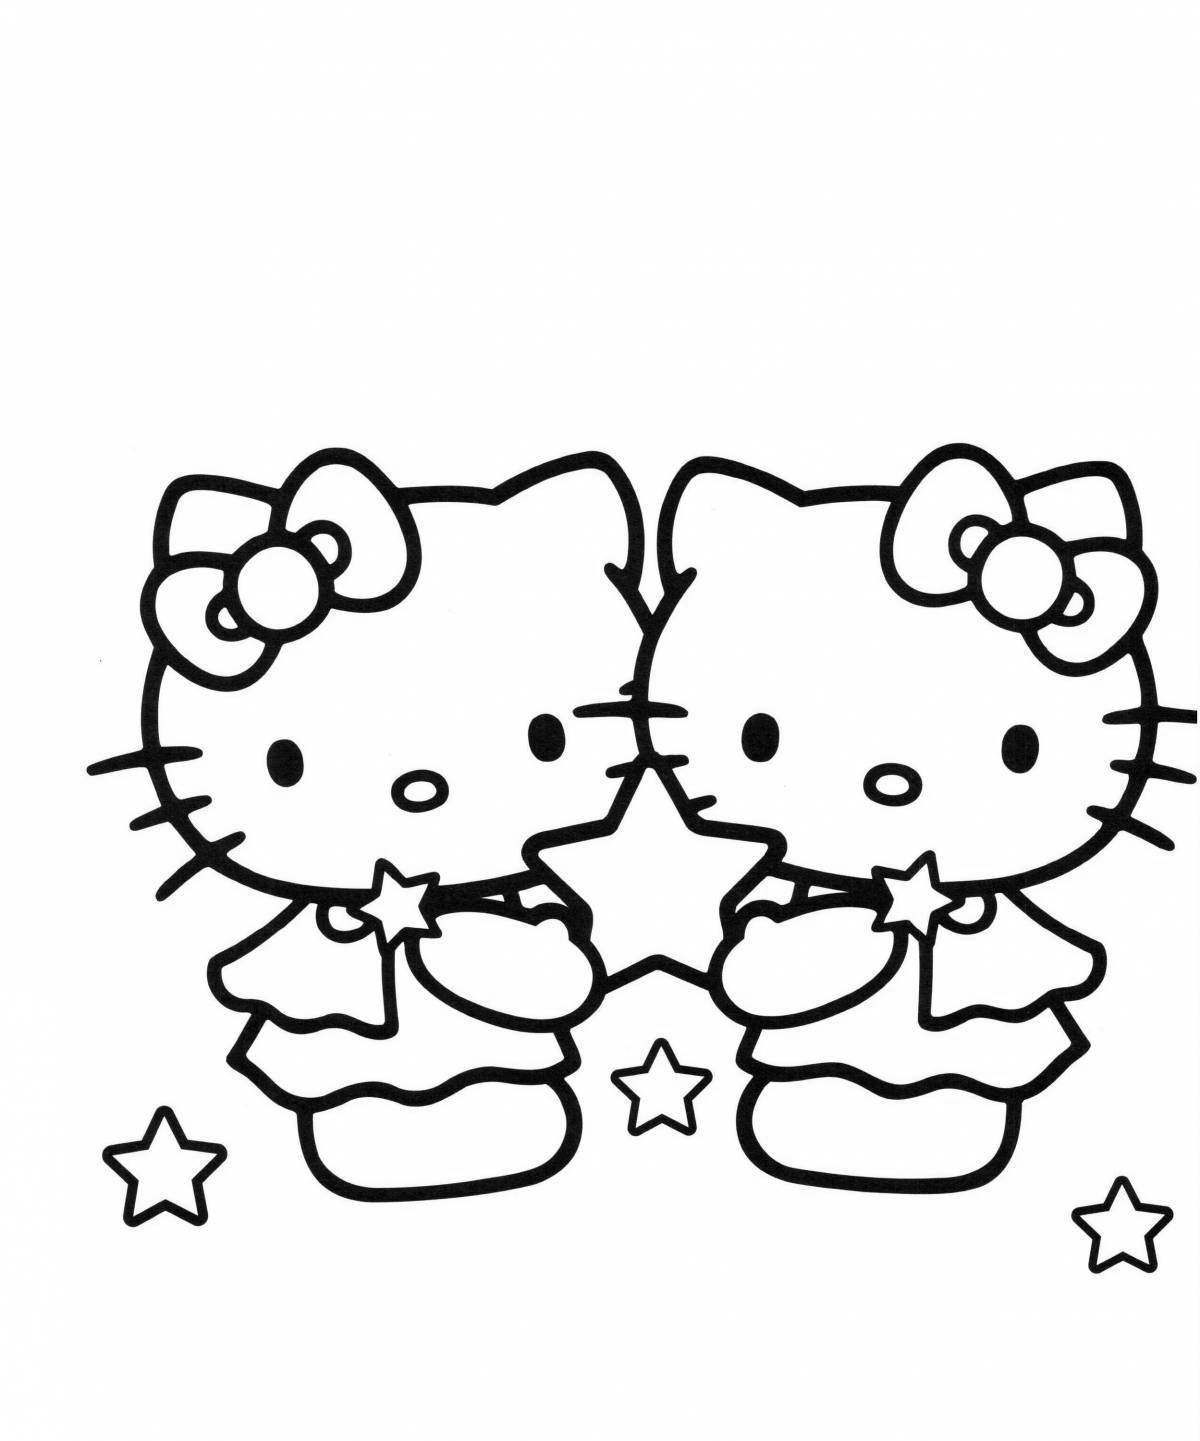 Charming kuromi many coloring pages